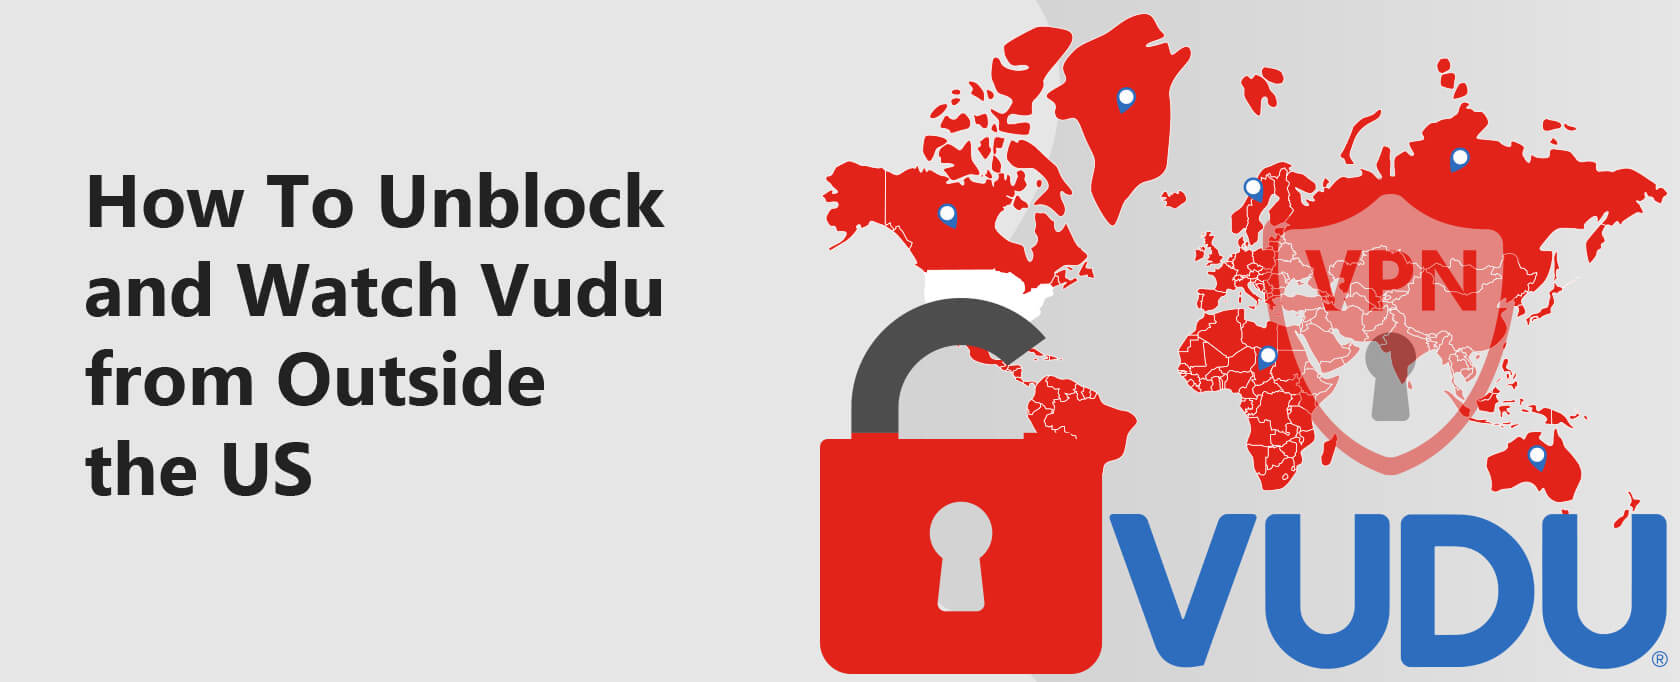 How To Unblock and Watch Vudu from Outside the US